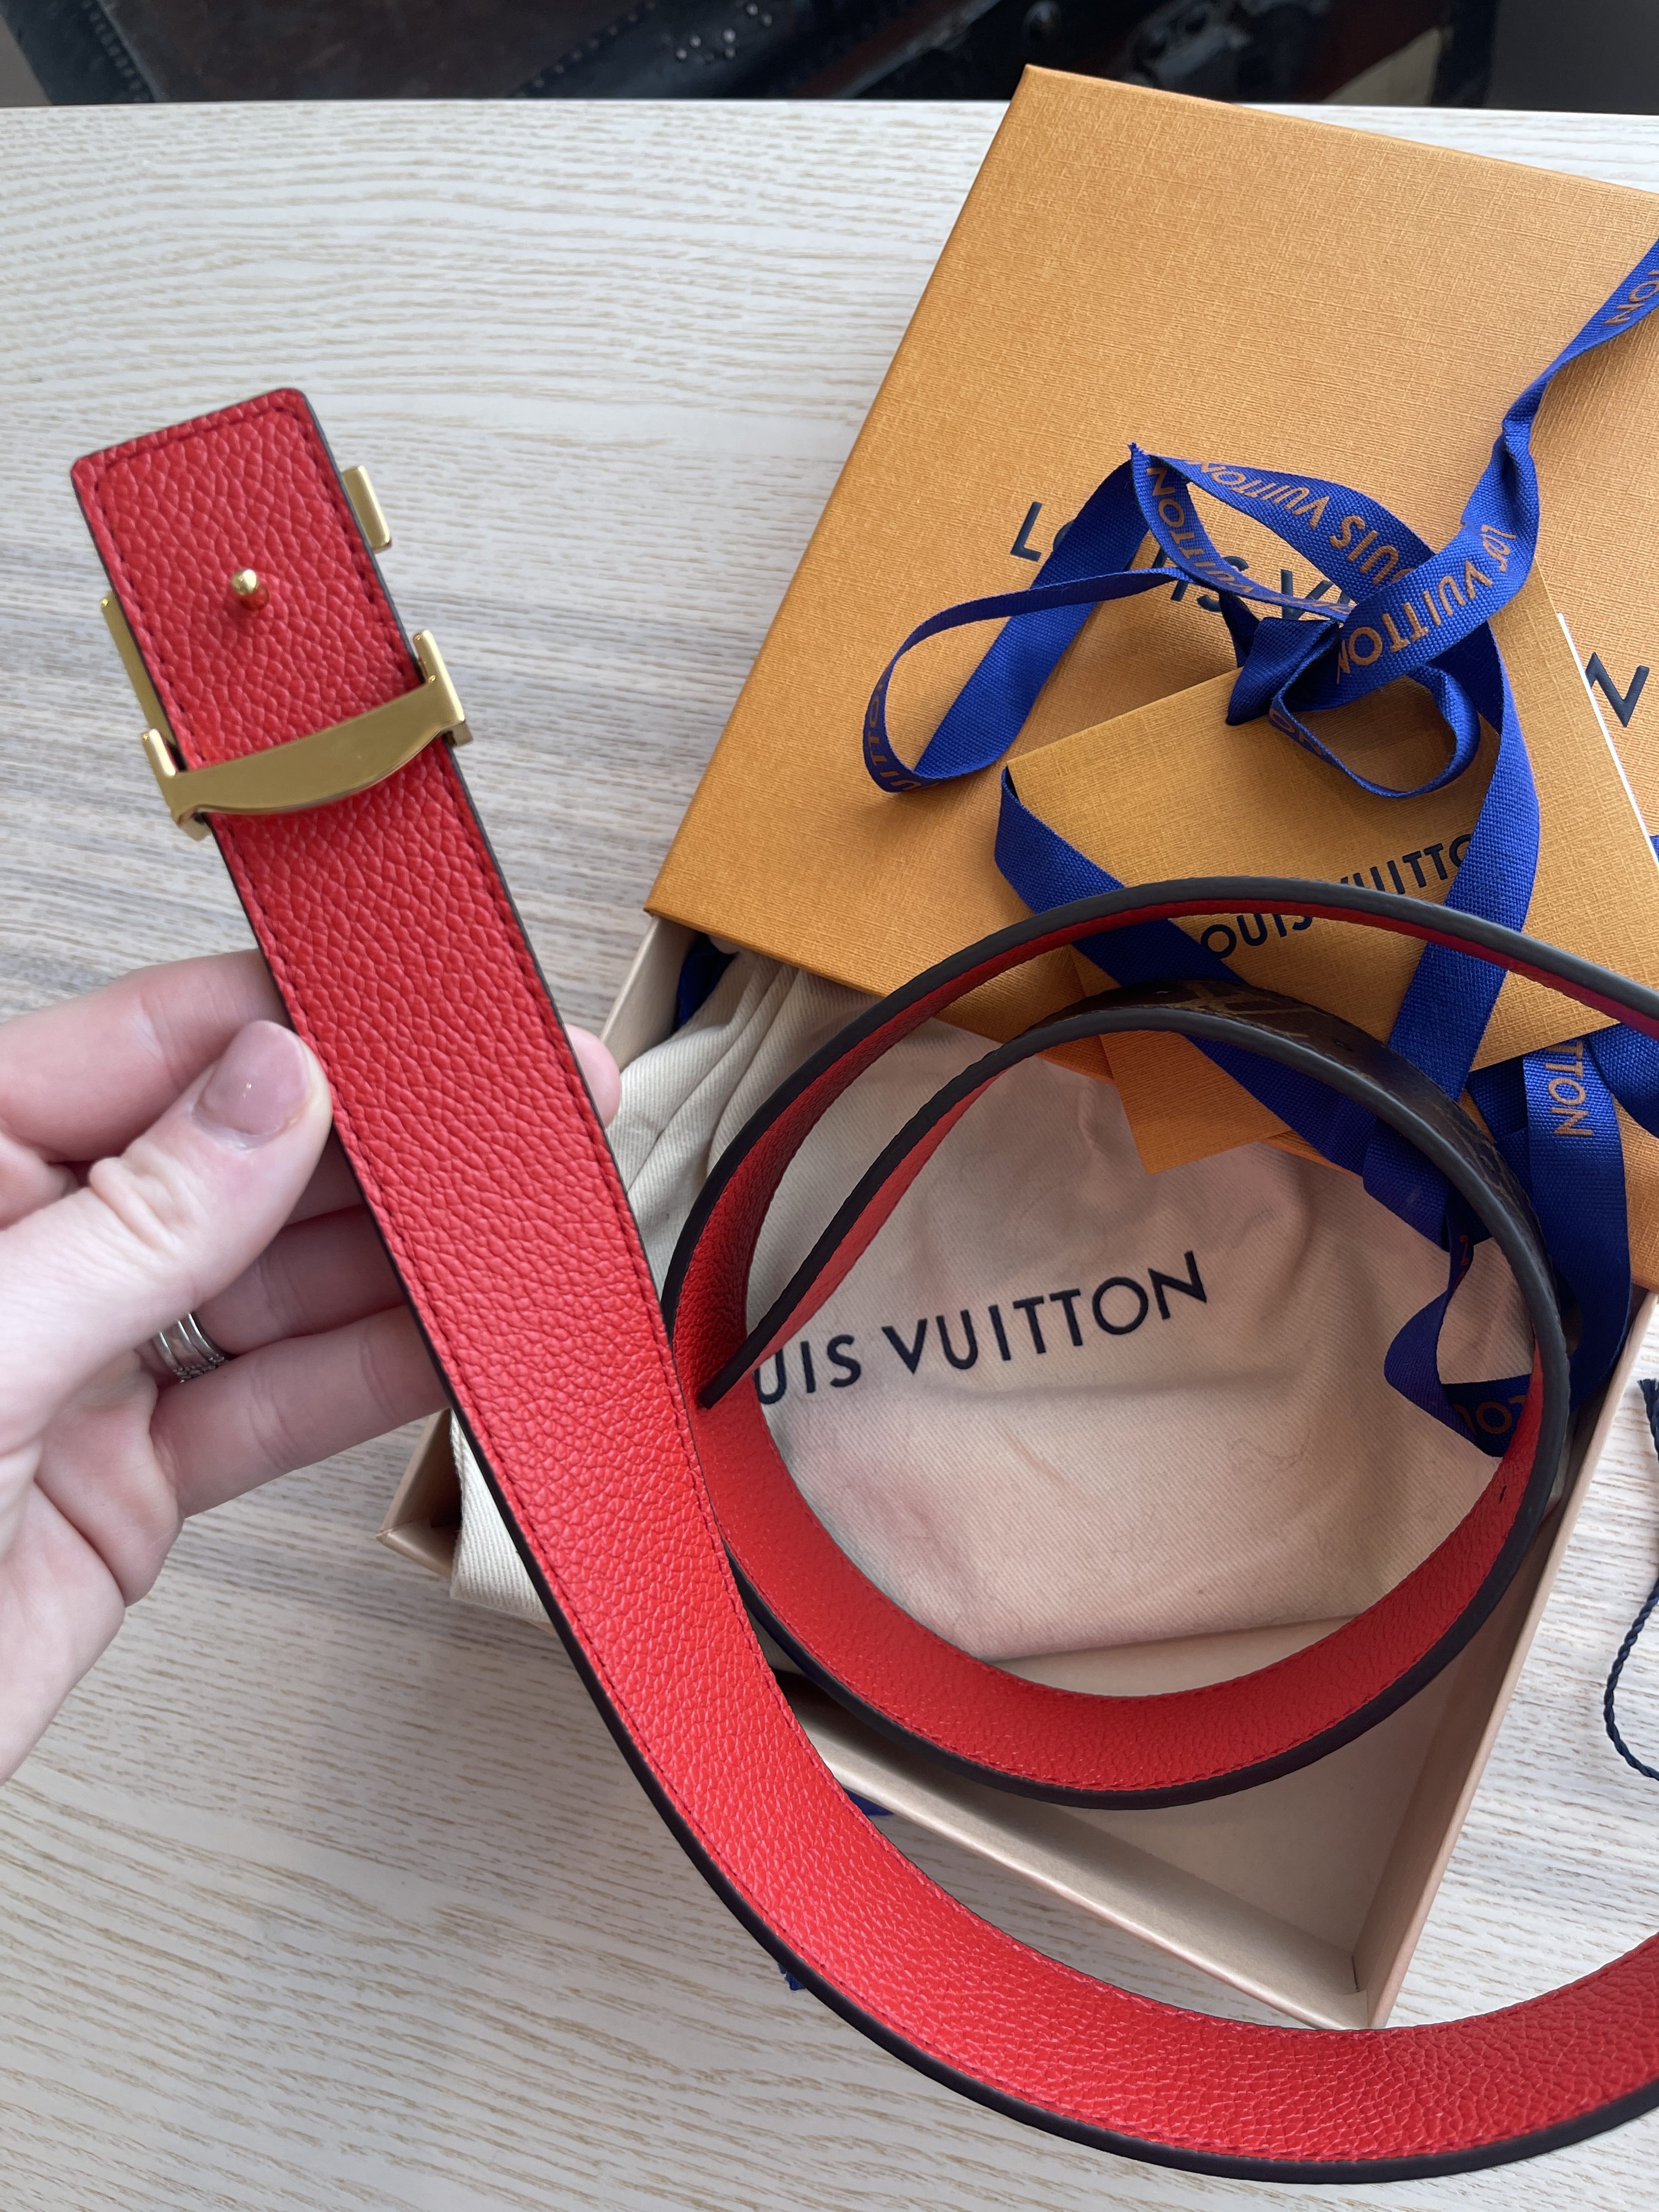 Initiales leather belt Louis Vuitton Red size 75 cm in Leather - 35258232